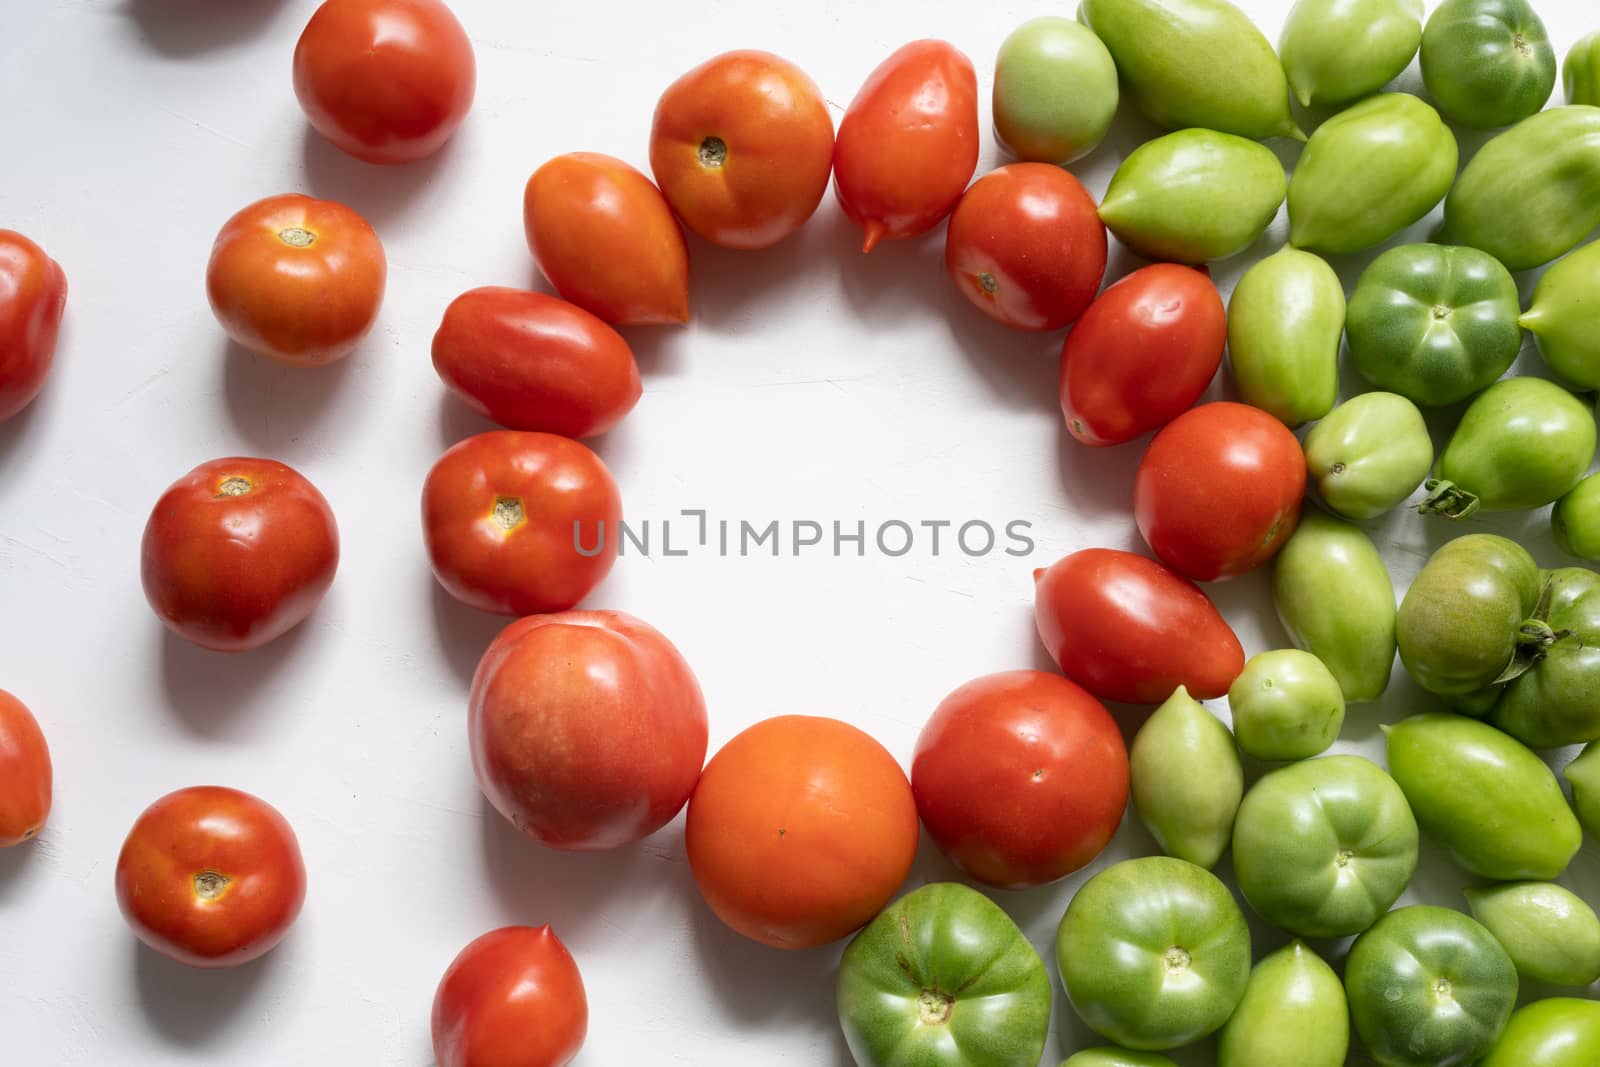 Optimal green and red tomatoes in the foreground